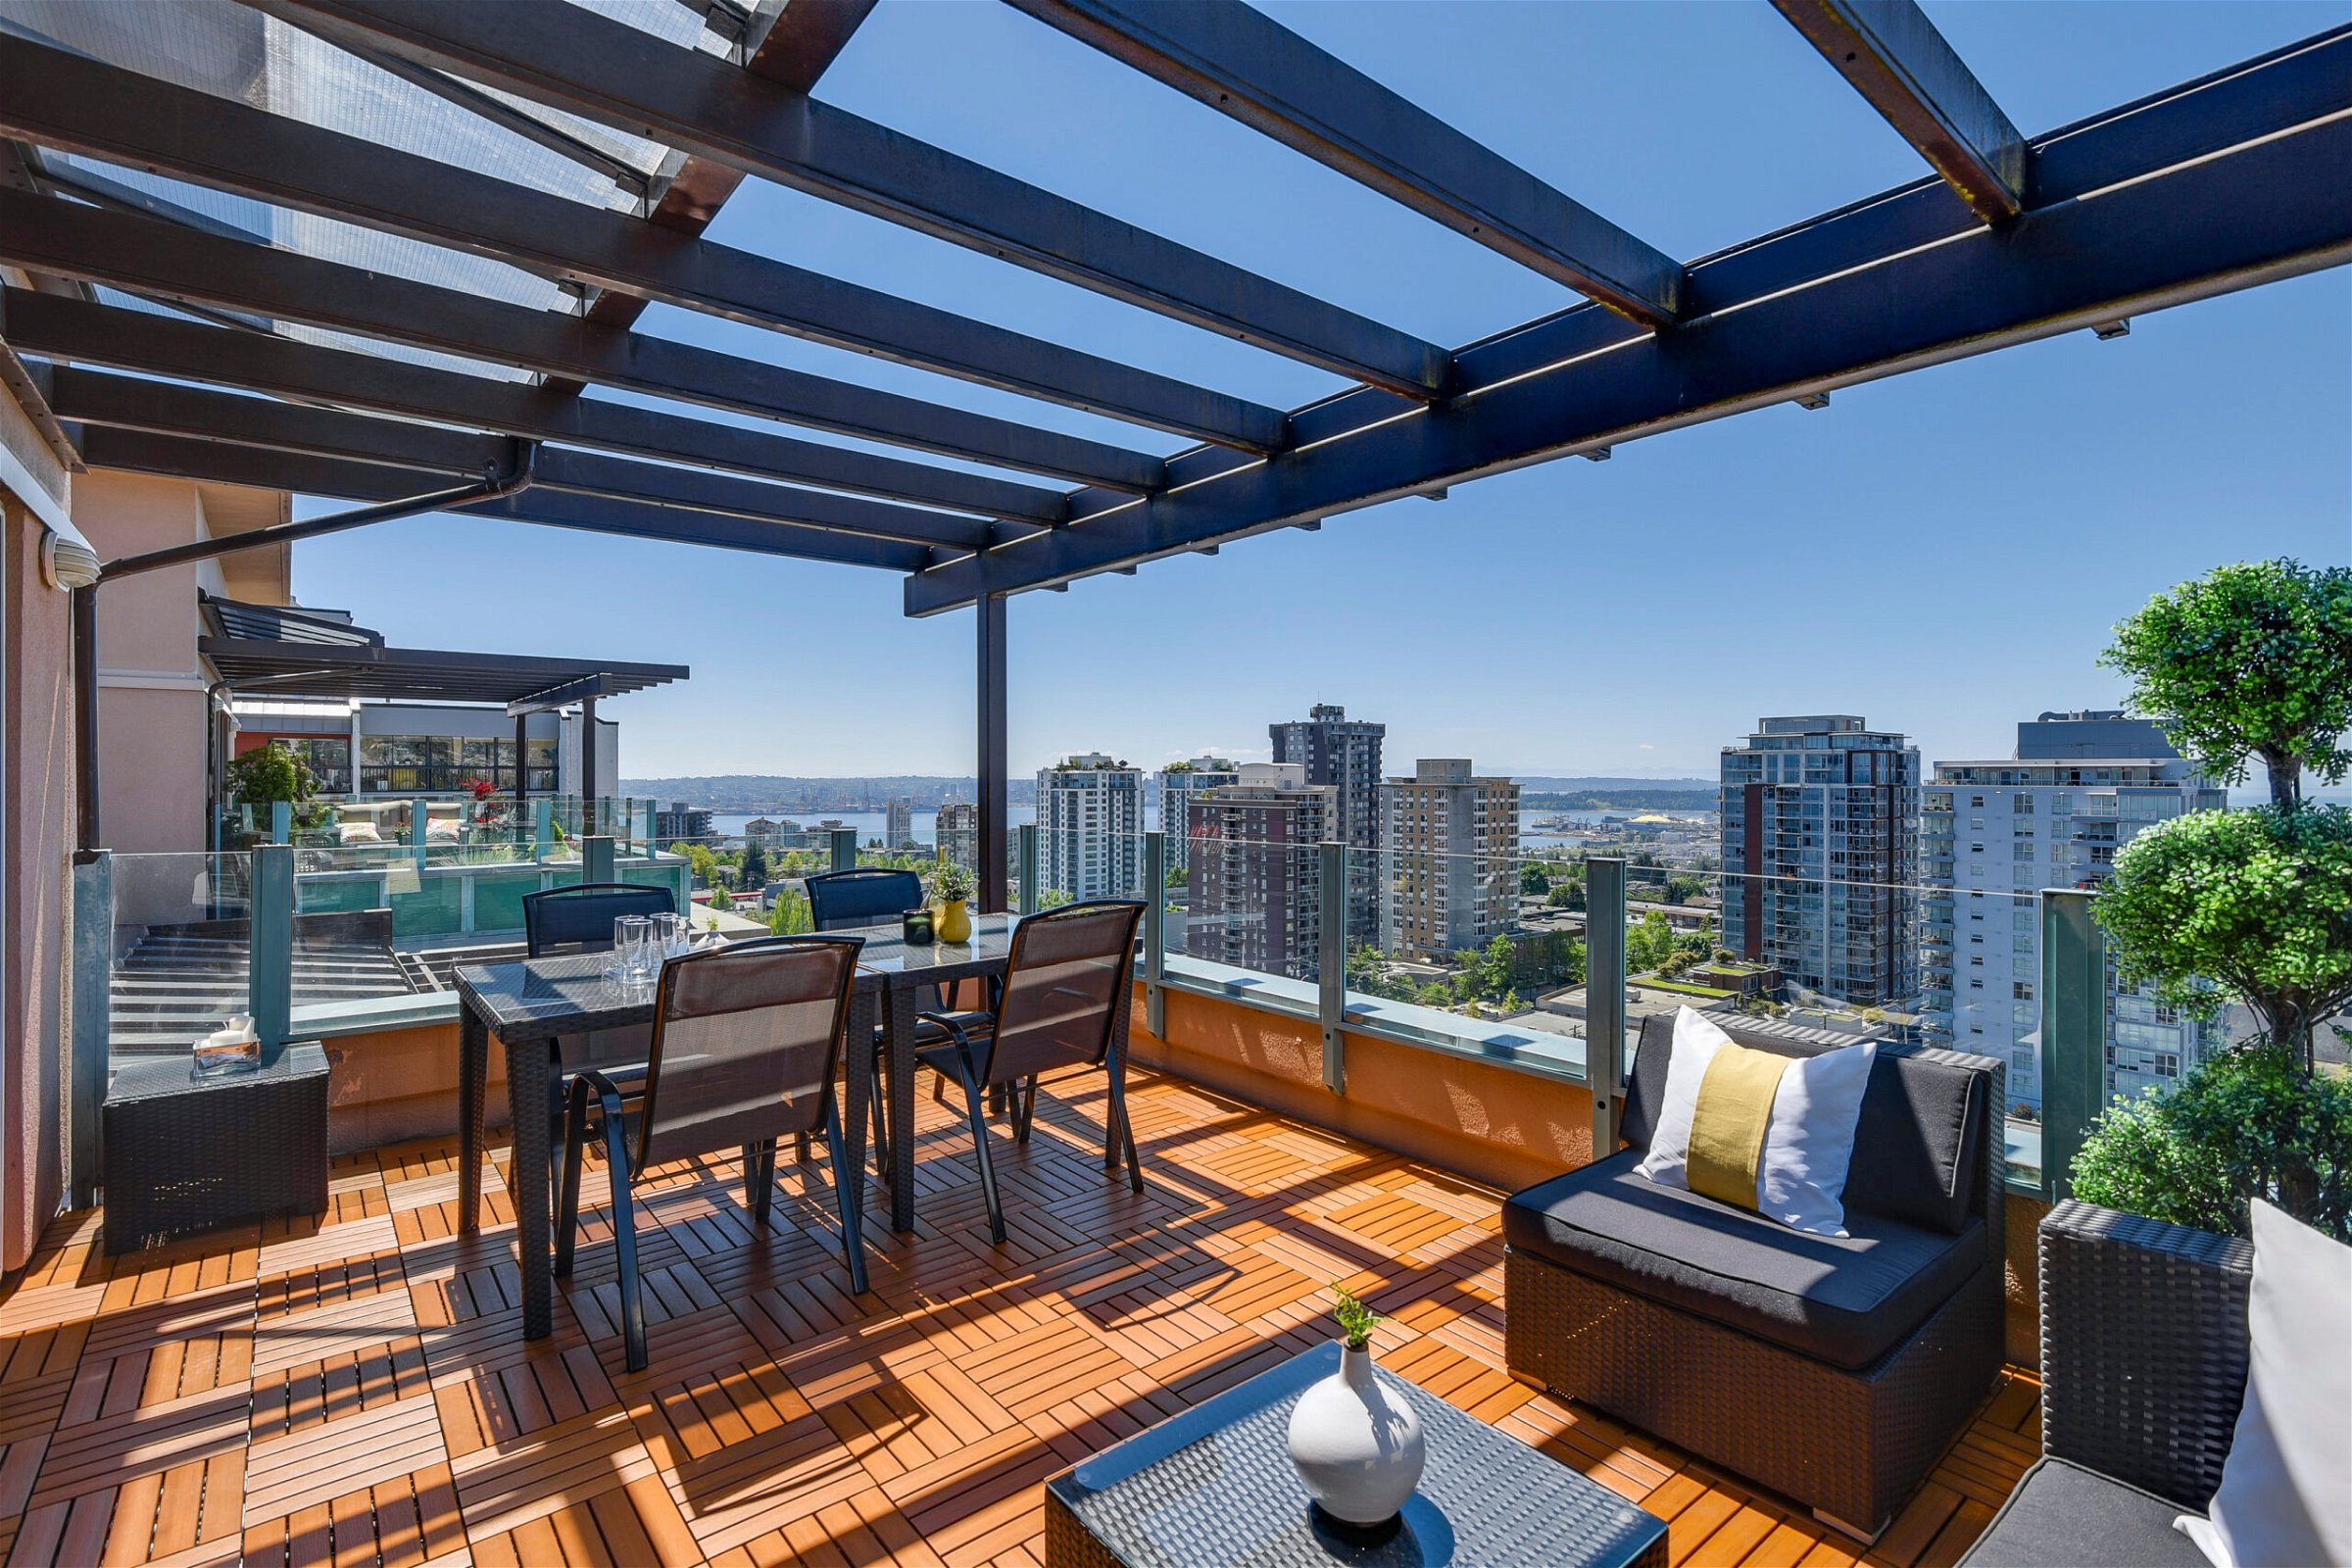 What is a pent house? What are its benefits?